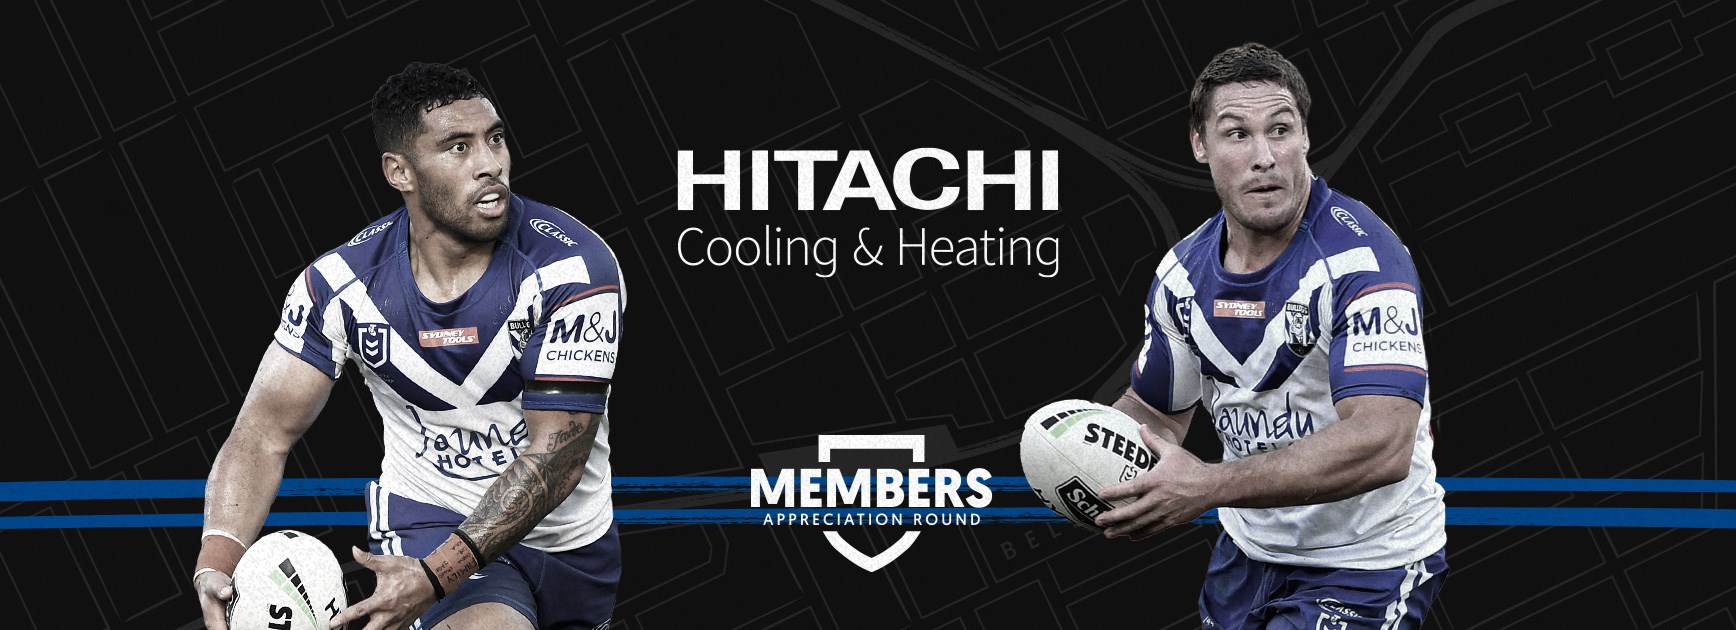 Members Appreciation Round Offer: Hitachi Cooling and Heating